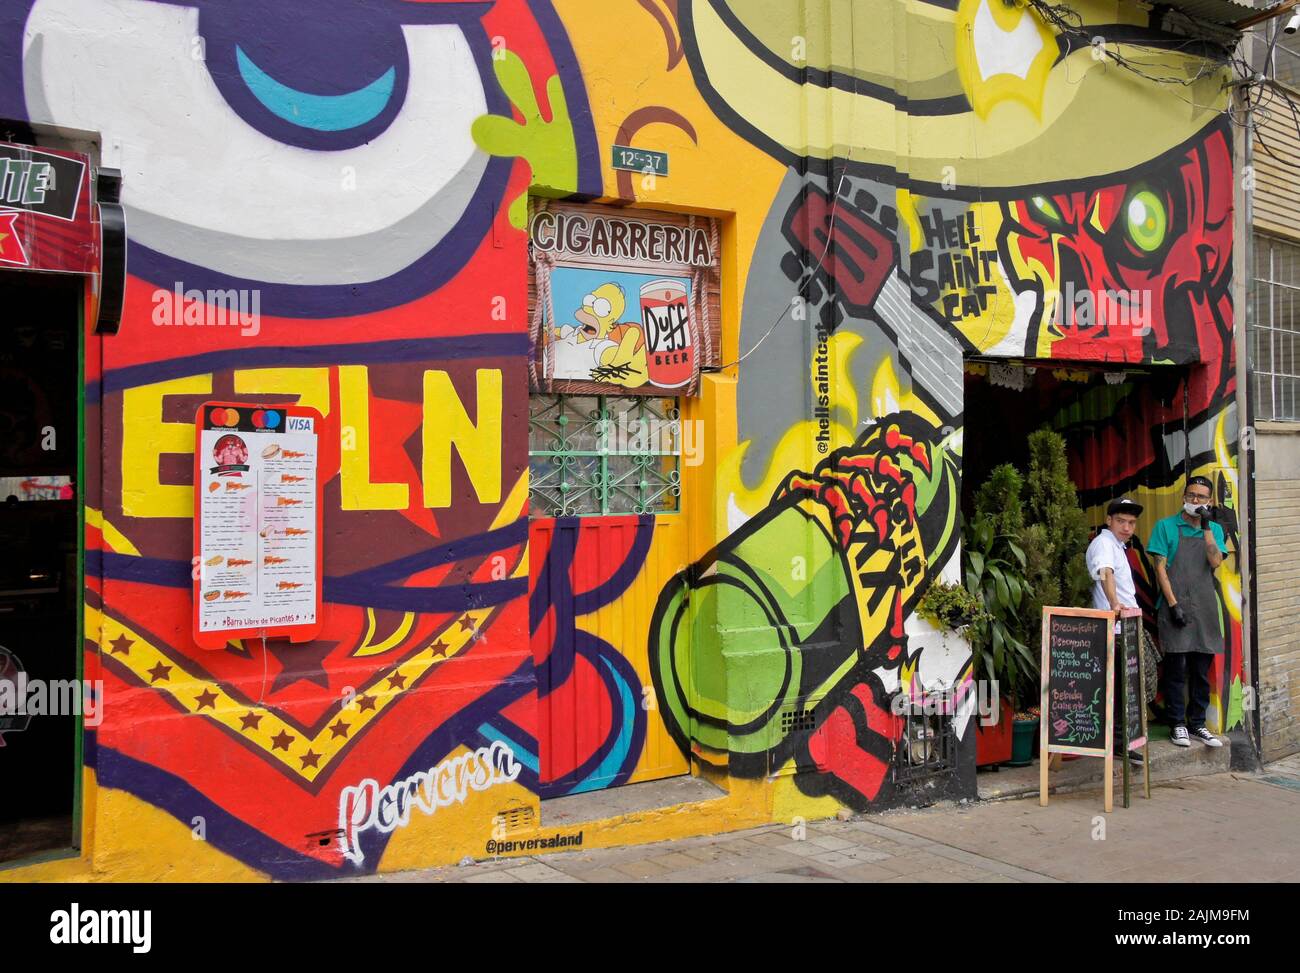 Colorful street art painted by Perversa and Hell Saint Cat on exterior of eateries in La Candelaria district of Bogota, Colombia Stock Photo